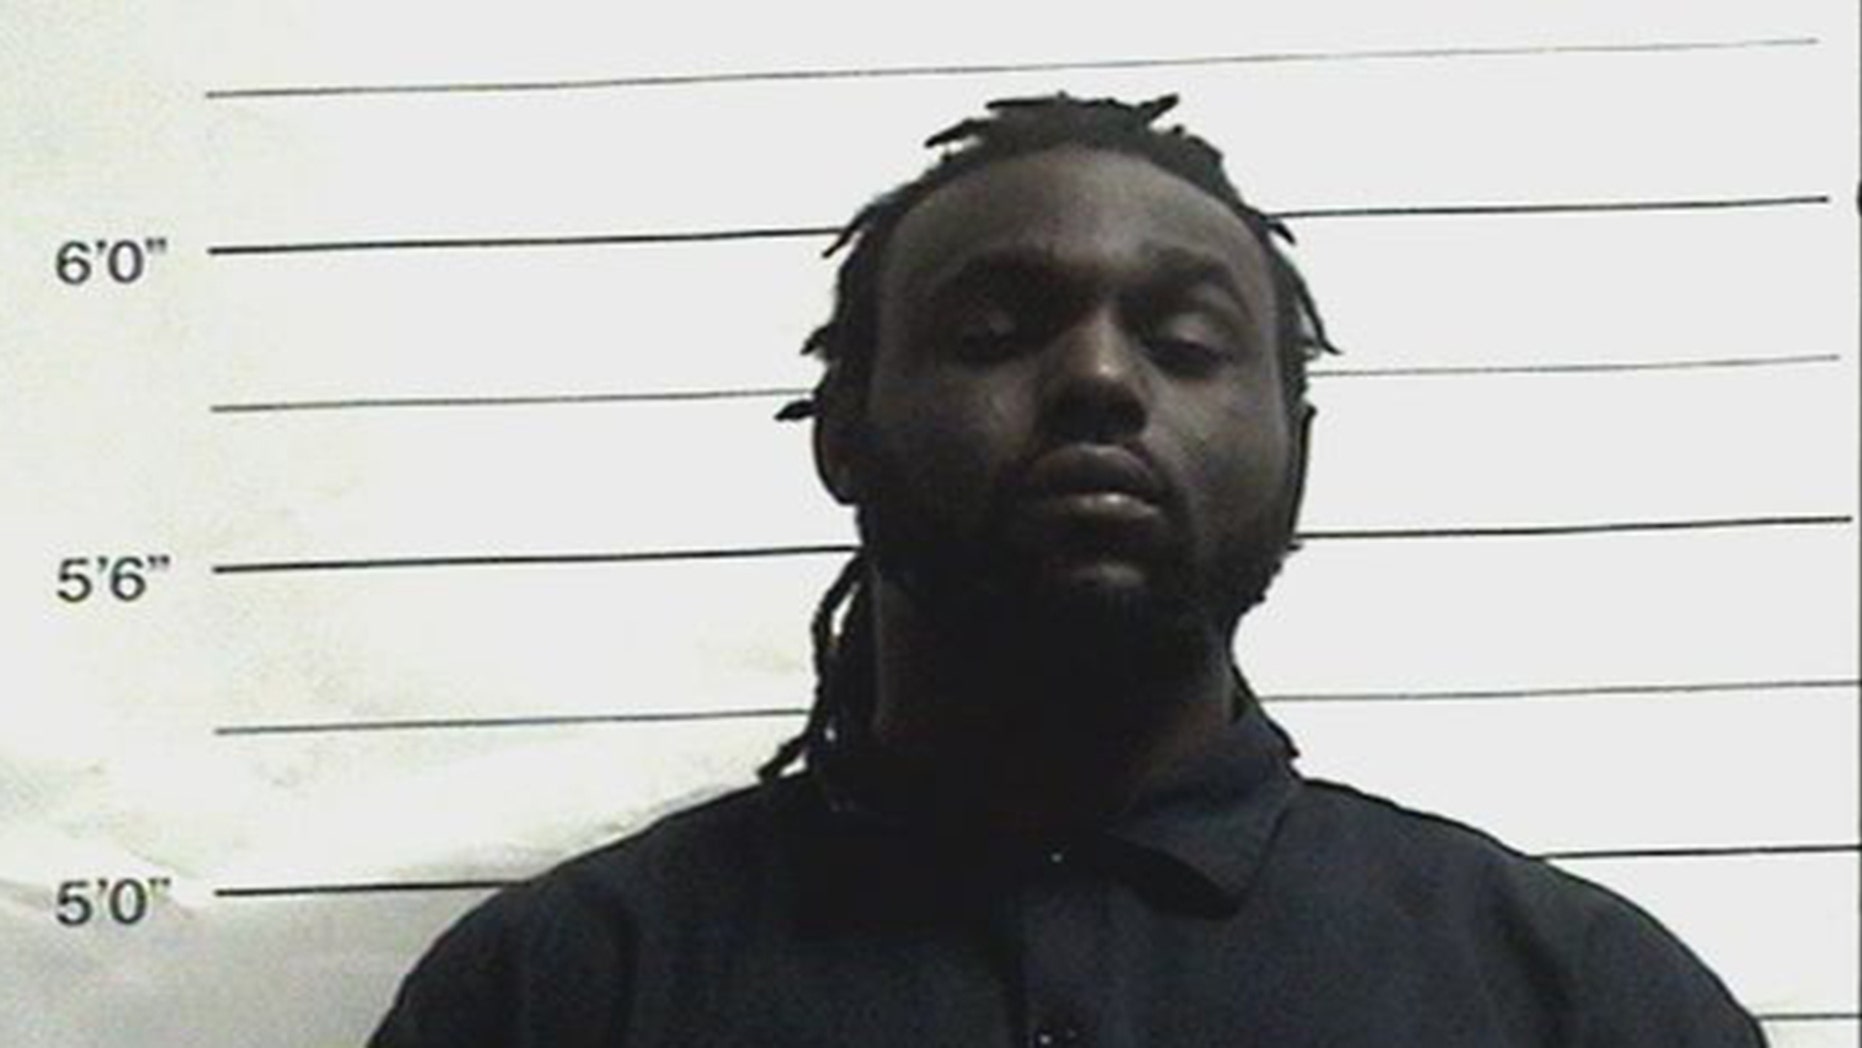 Arthur Posey, 30, was at Willie’s Chicken Shack on Nov. 13 when employees say he got into a heated argument with staff.